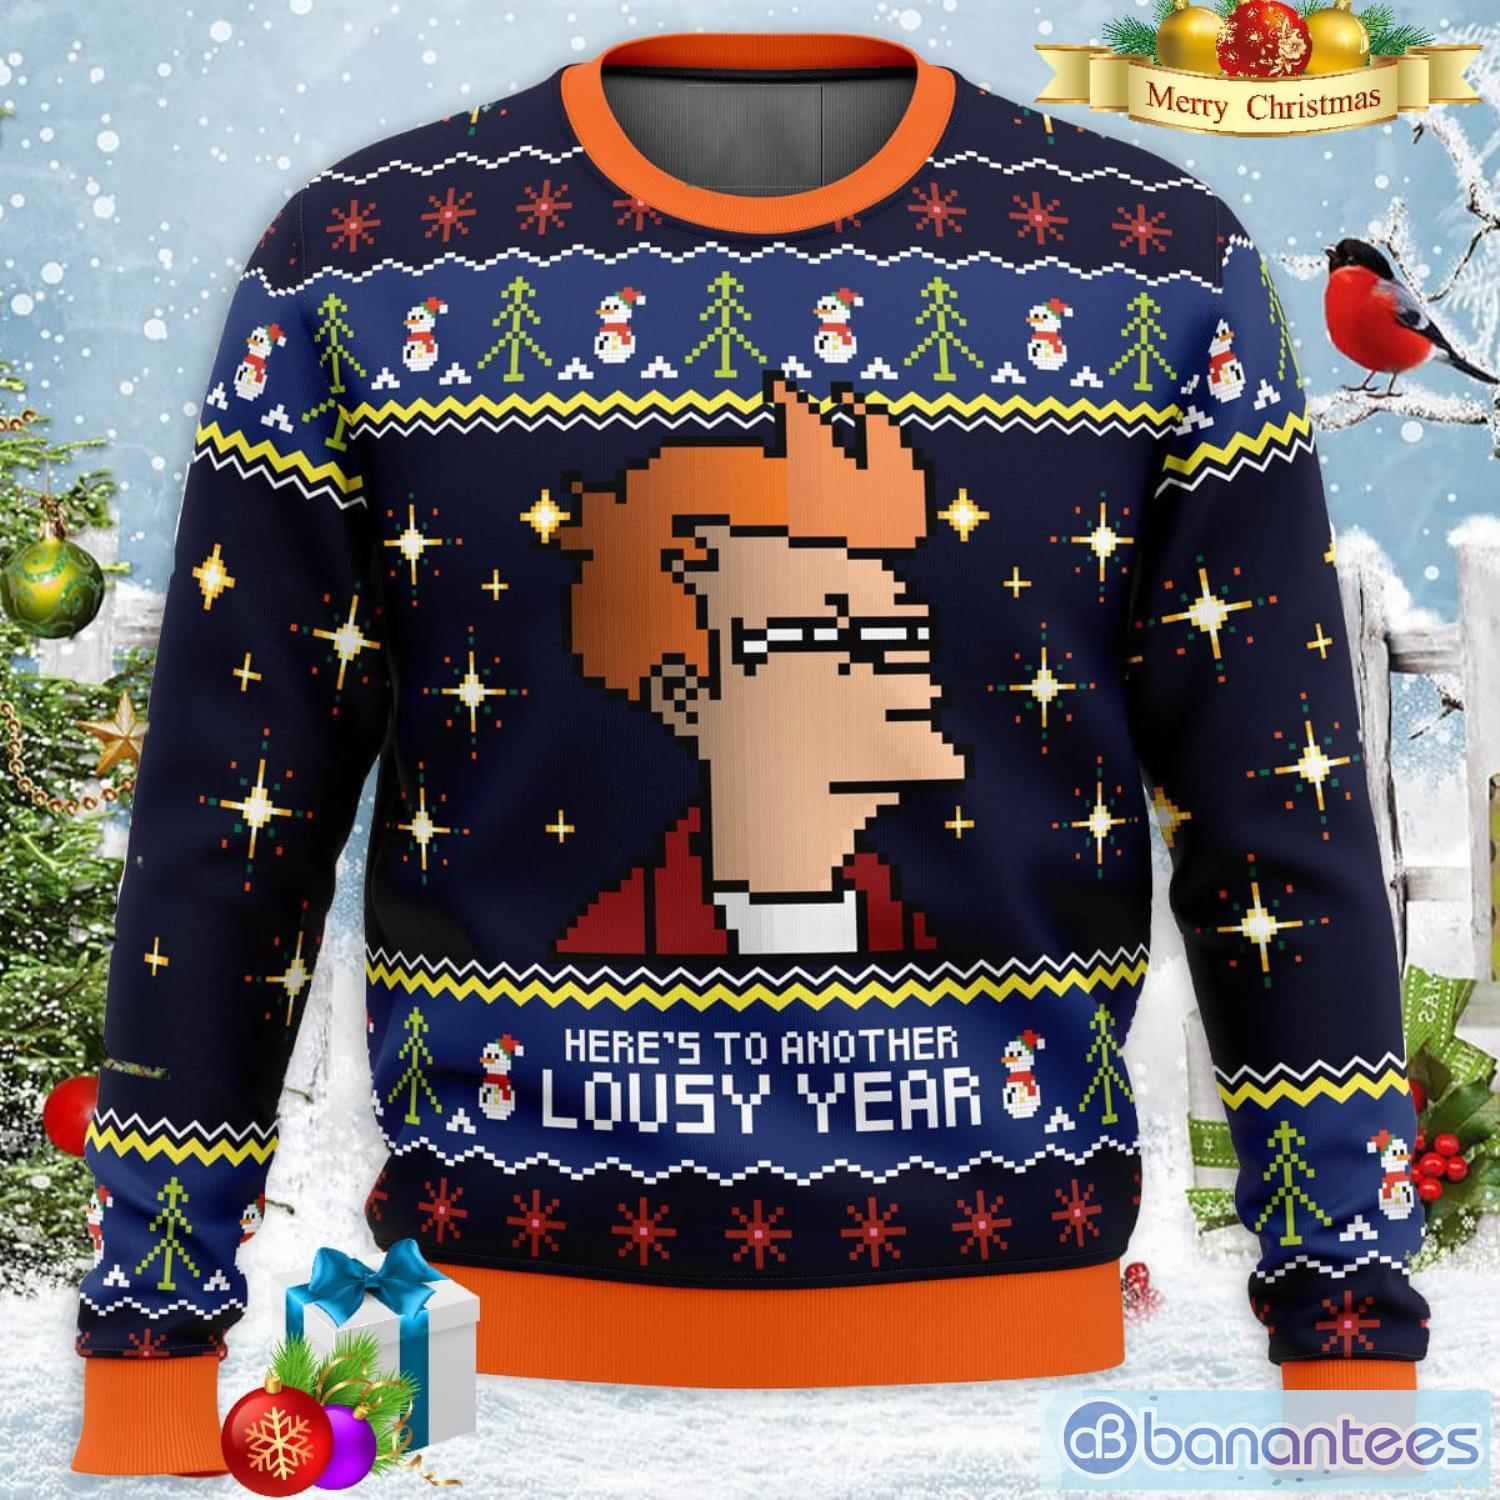 Here’s to another LOUSY YEAR Ugly Christmas Sweater Product Photo 1